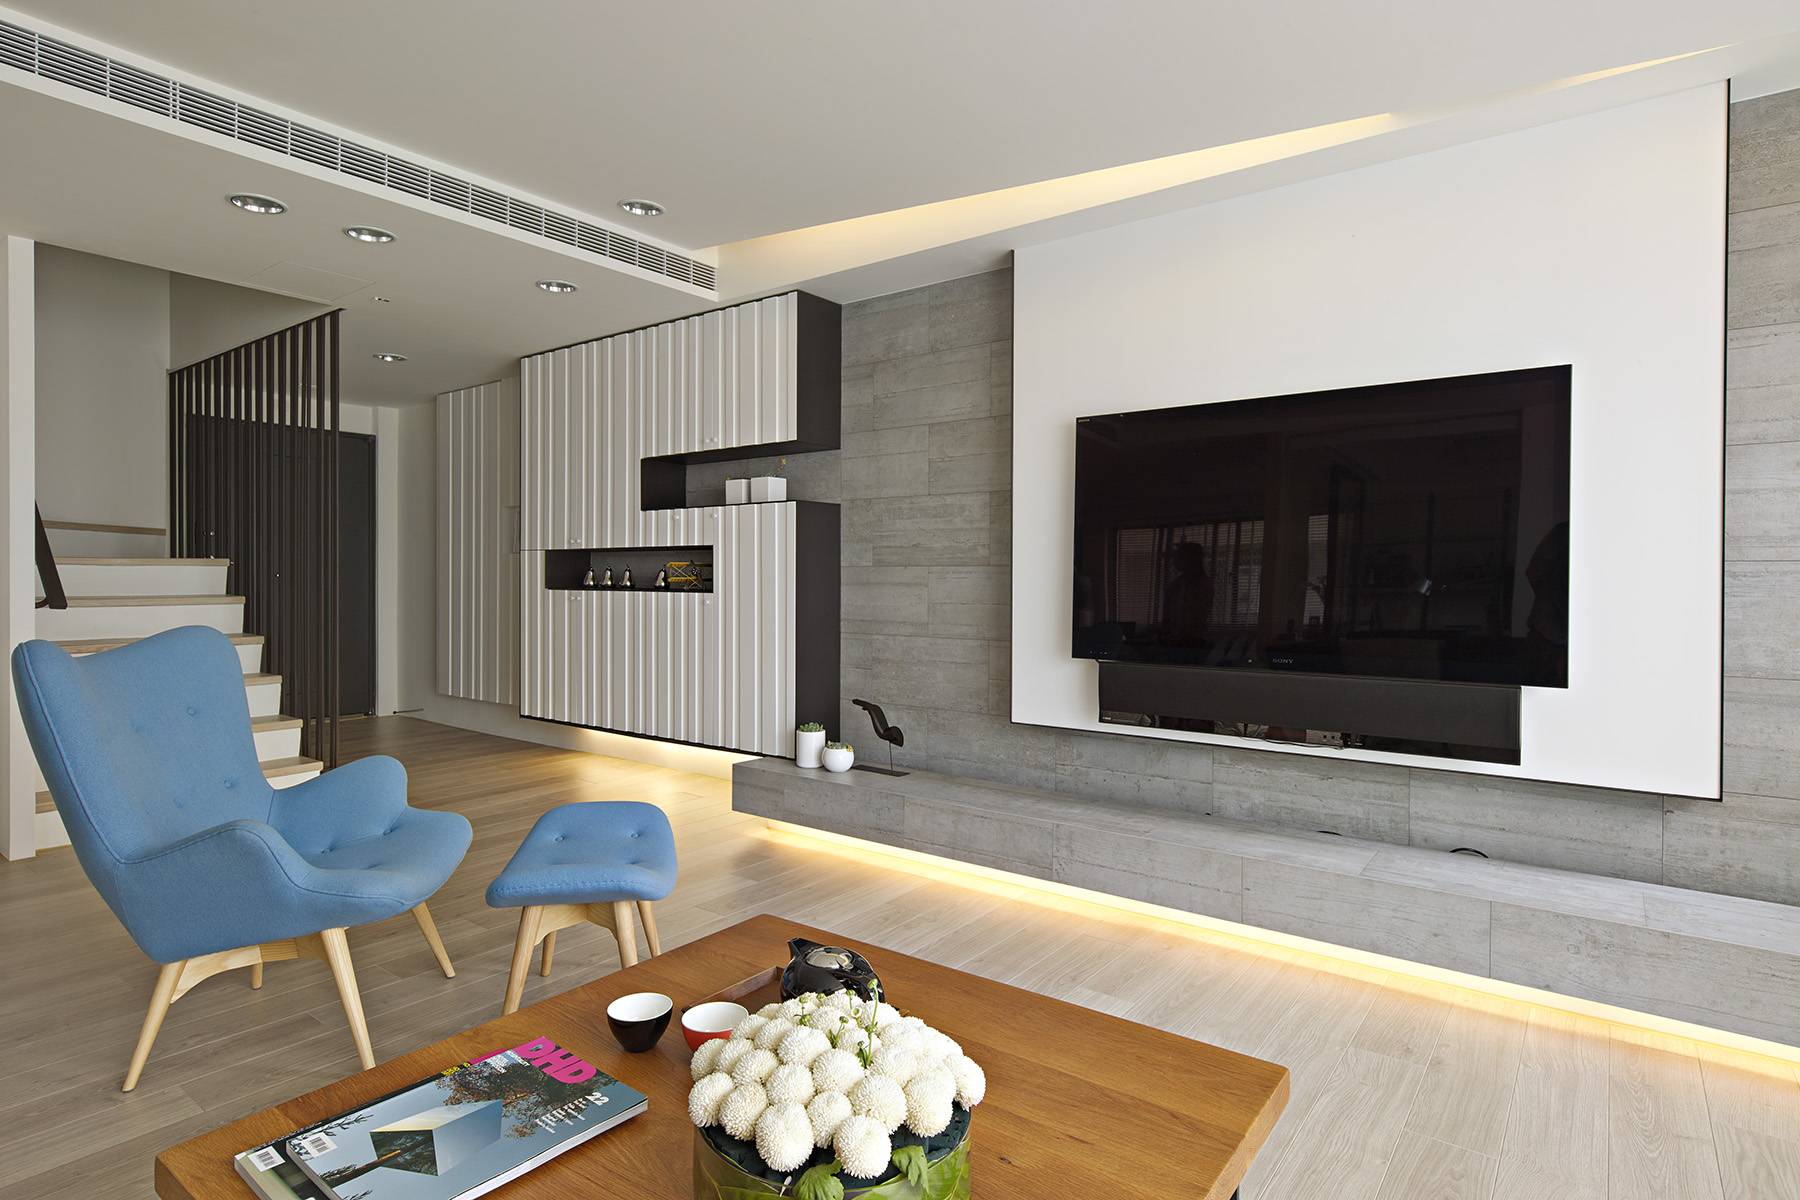 Living Room with Modern and Minimalist Inspirations [Photo by Home Desigining]